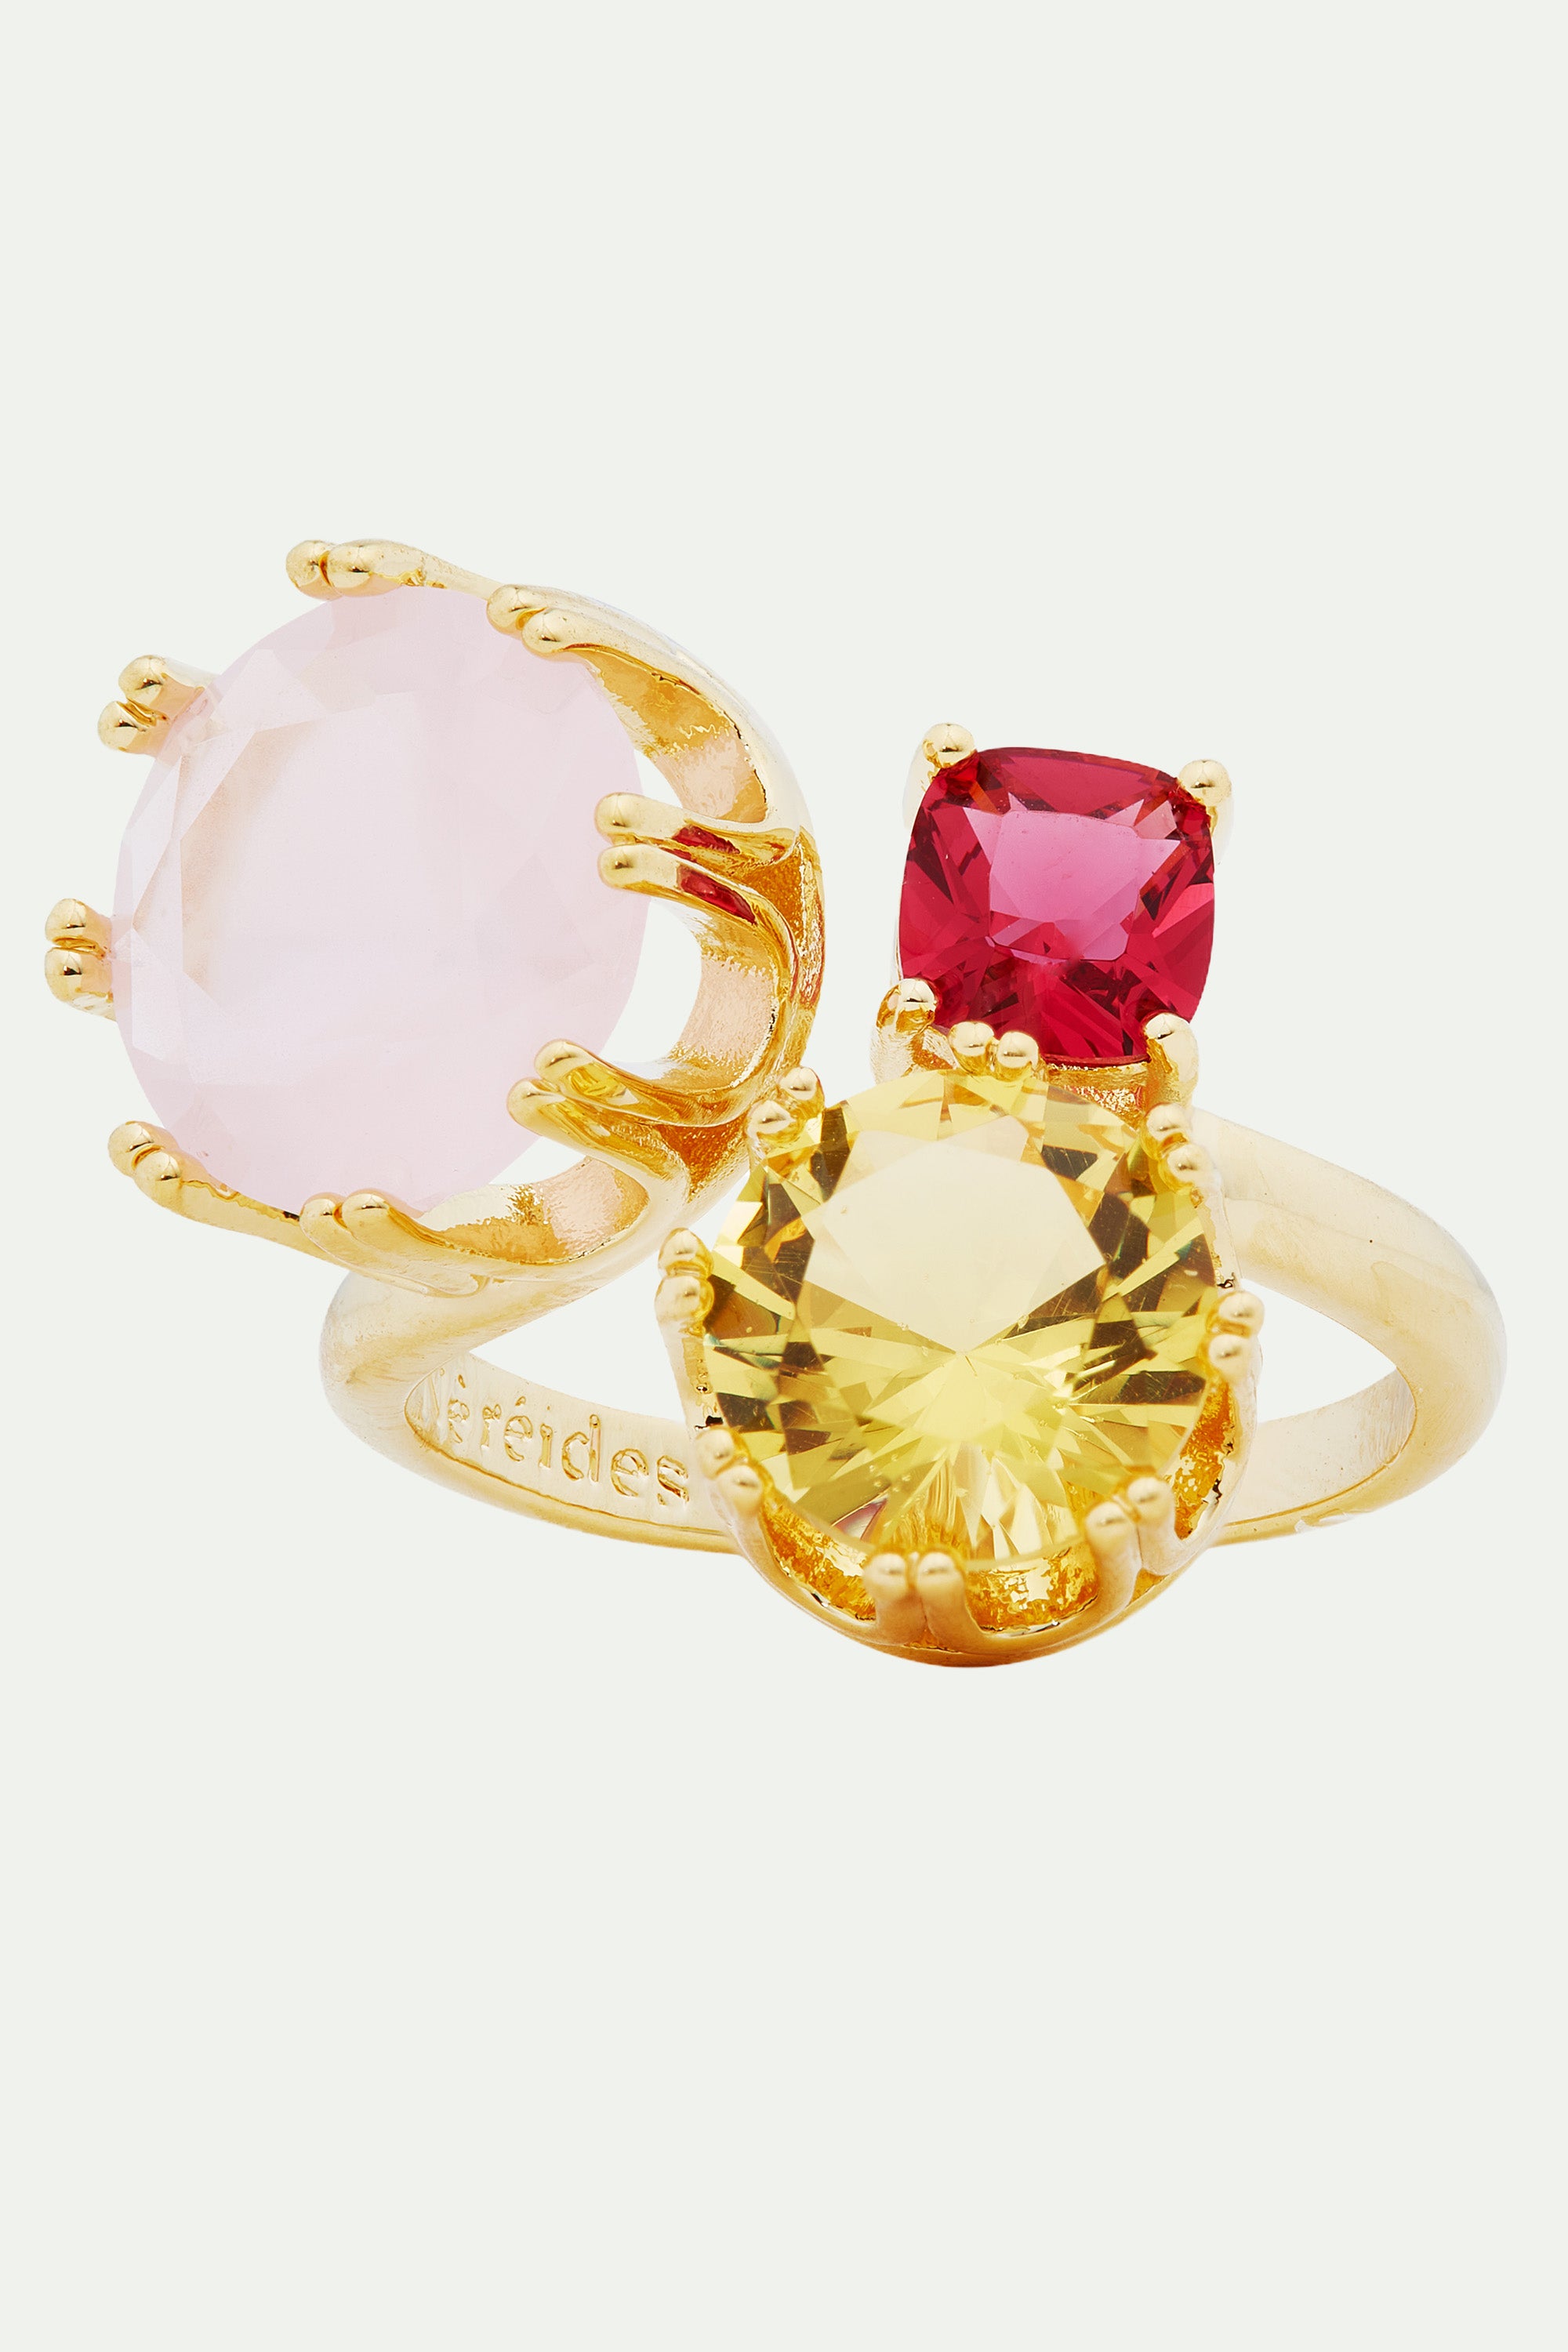 Pink and yellow stones you and me ajustable ring